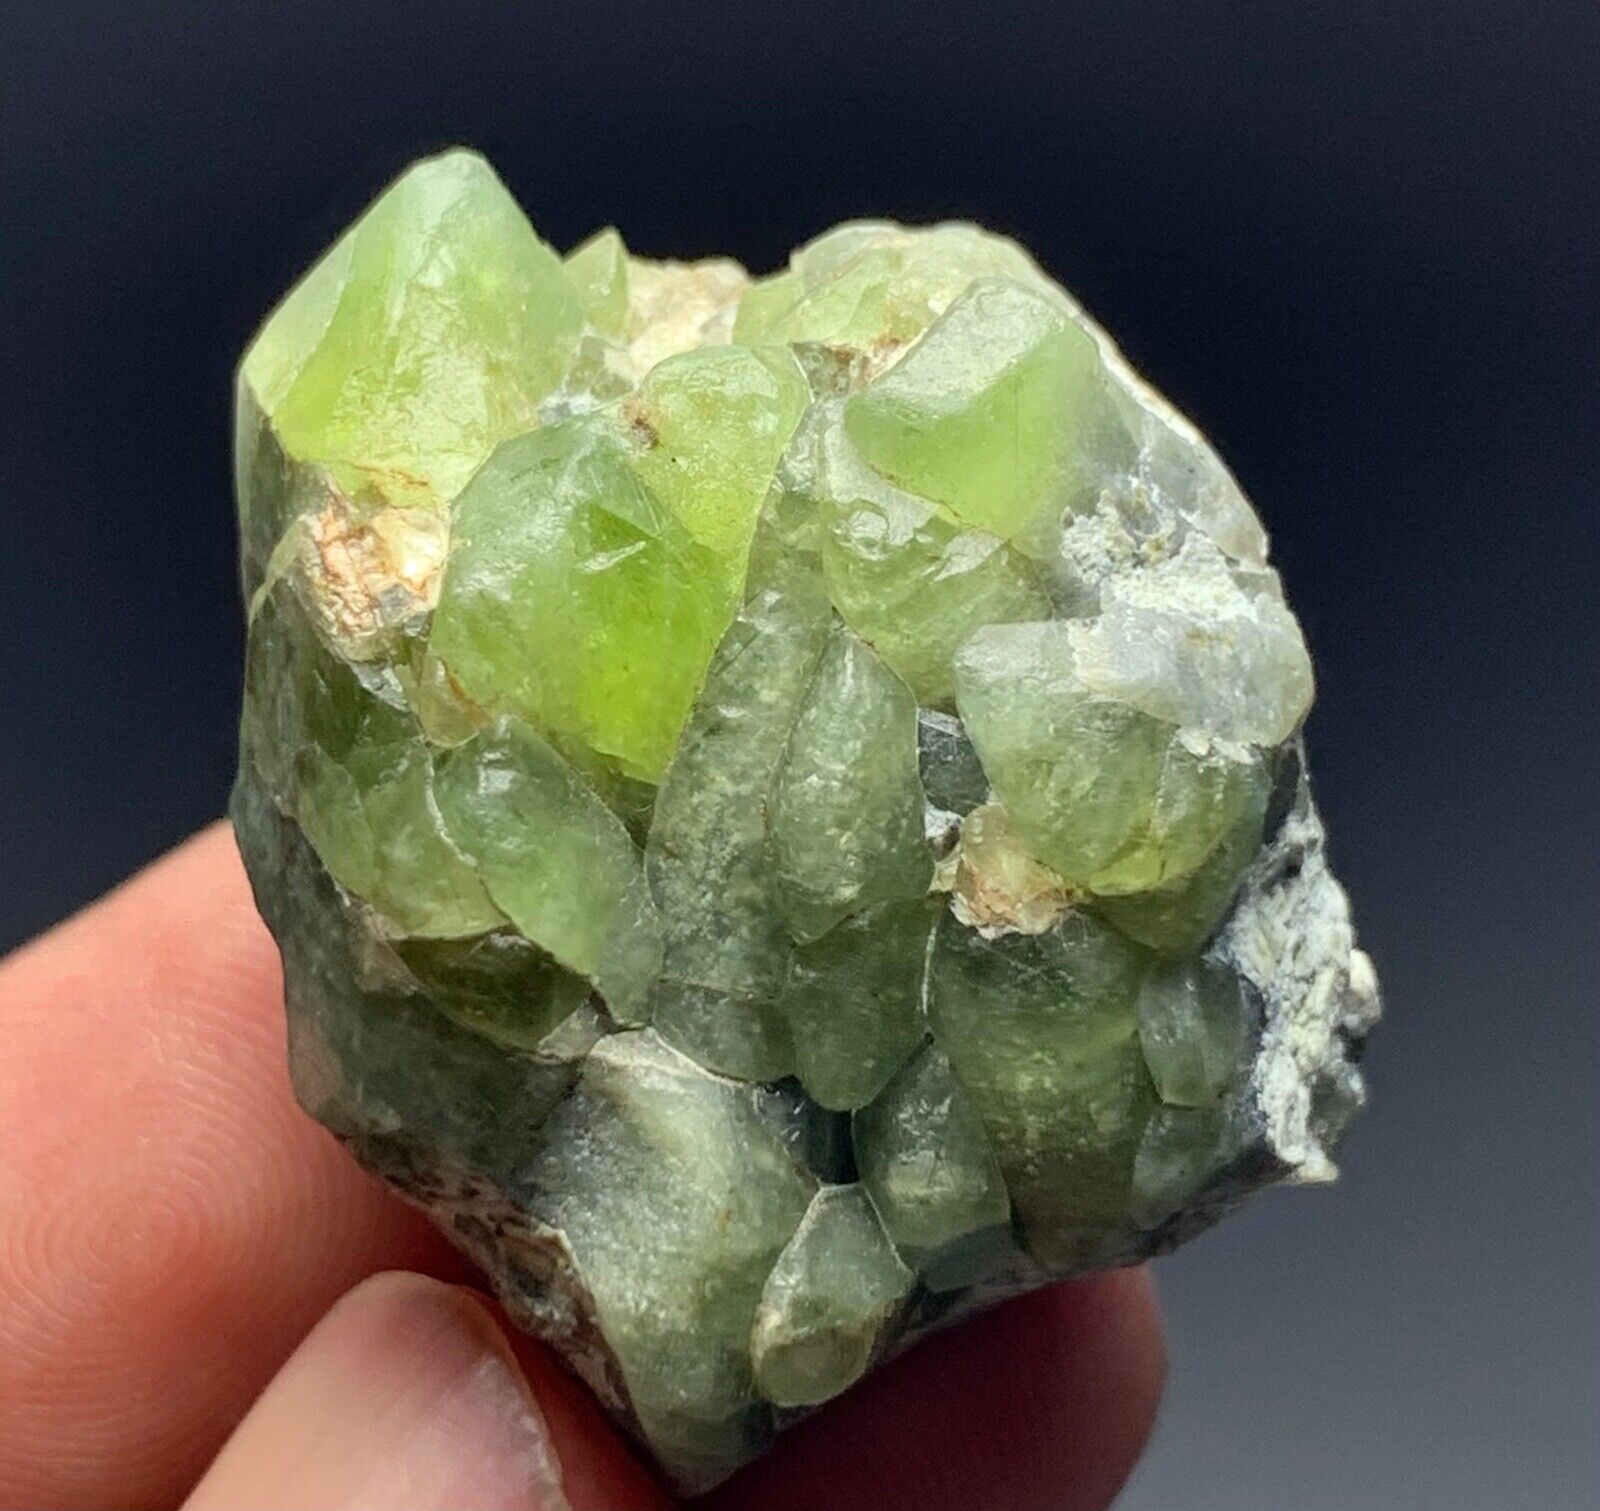 134 Cts Natural Peridot Crystal Specimen from Pakistan.z